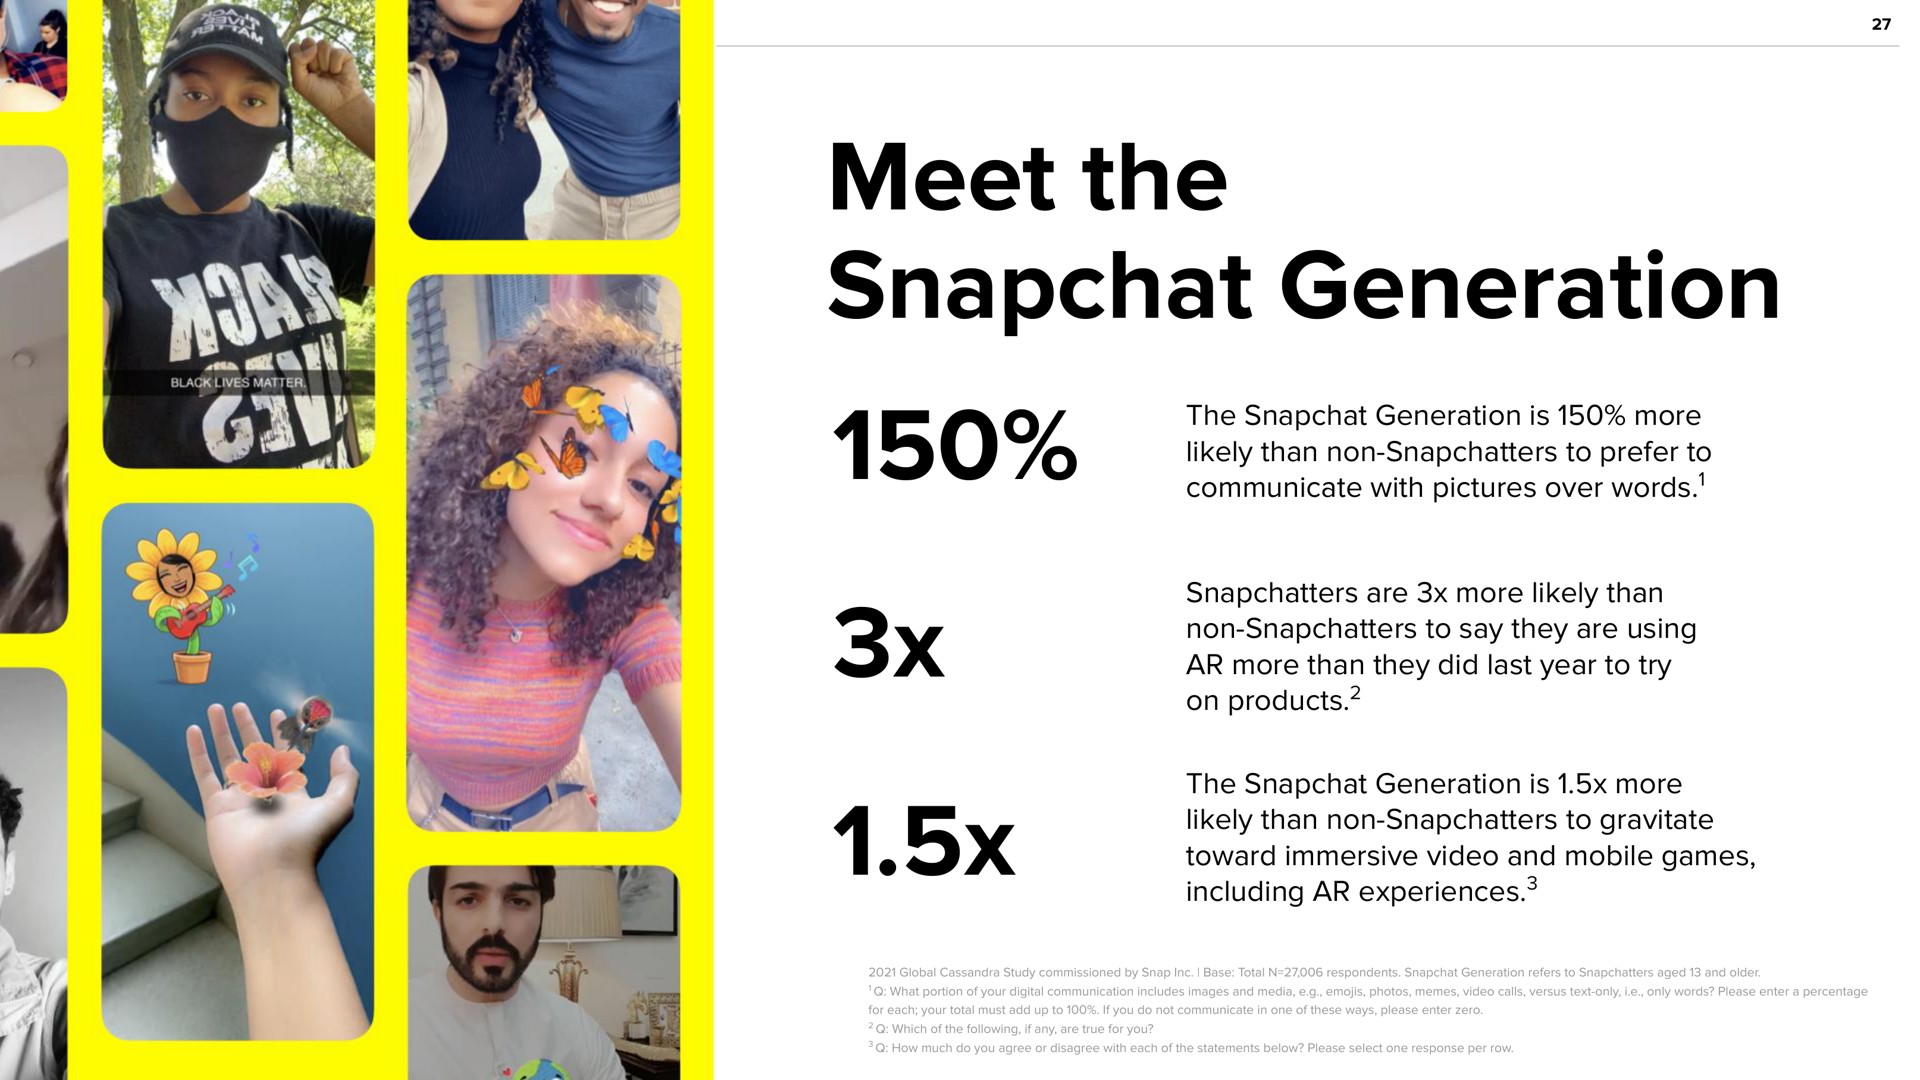 meet the generation on products toward immersive video and mobile games | Snap Inc